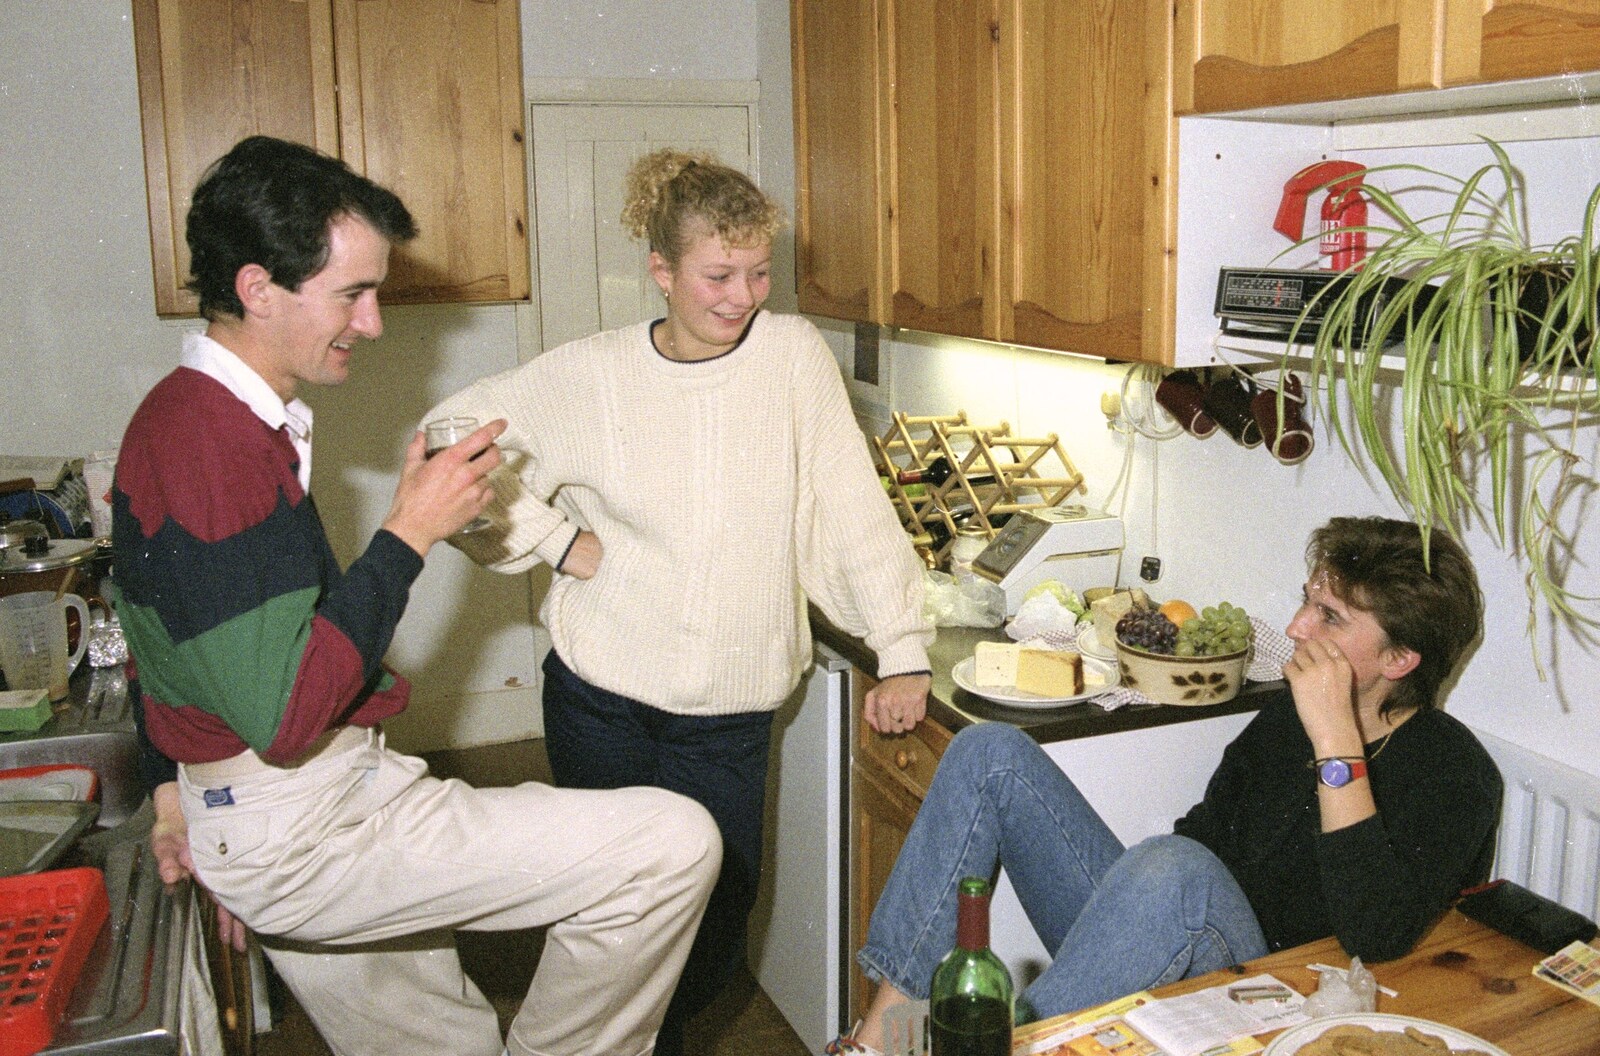 More chatting in the kitchen from A Trip to Kenilworth, Warwickshire - 21st September 1989